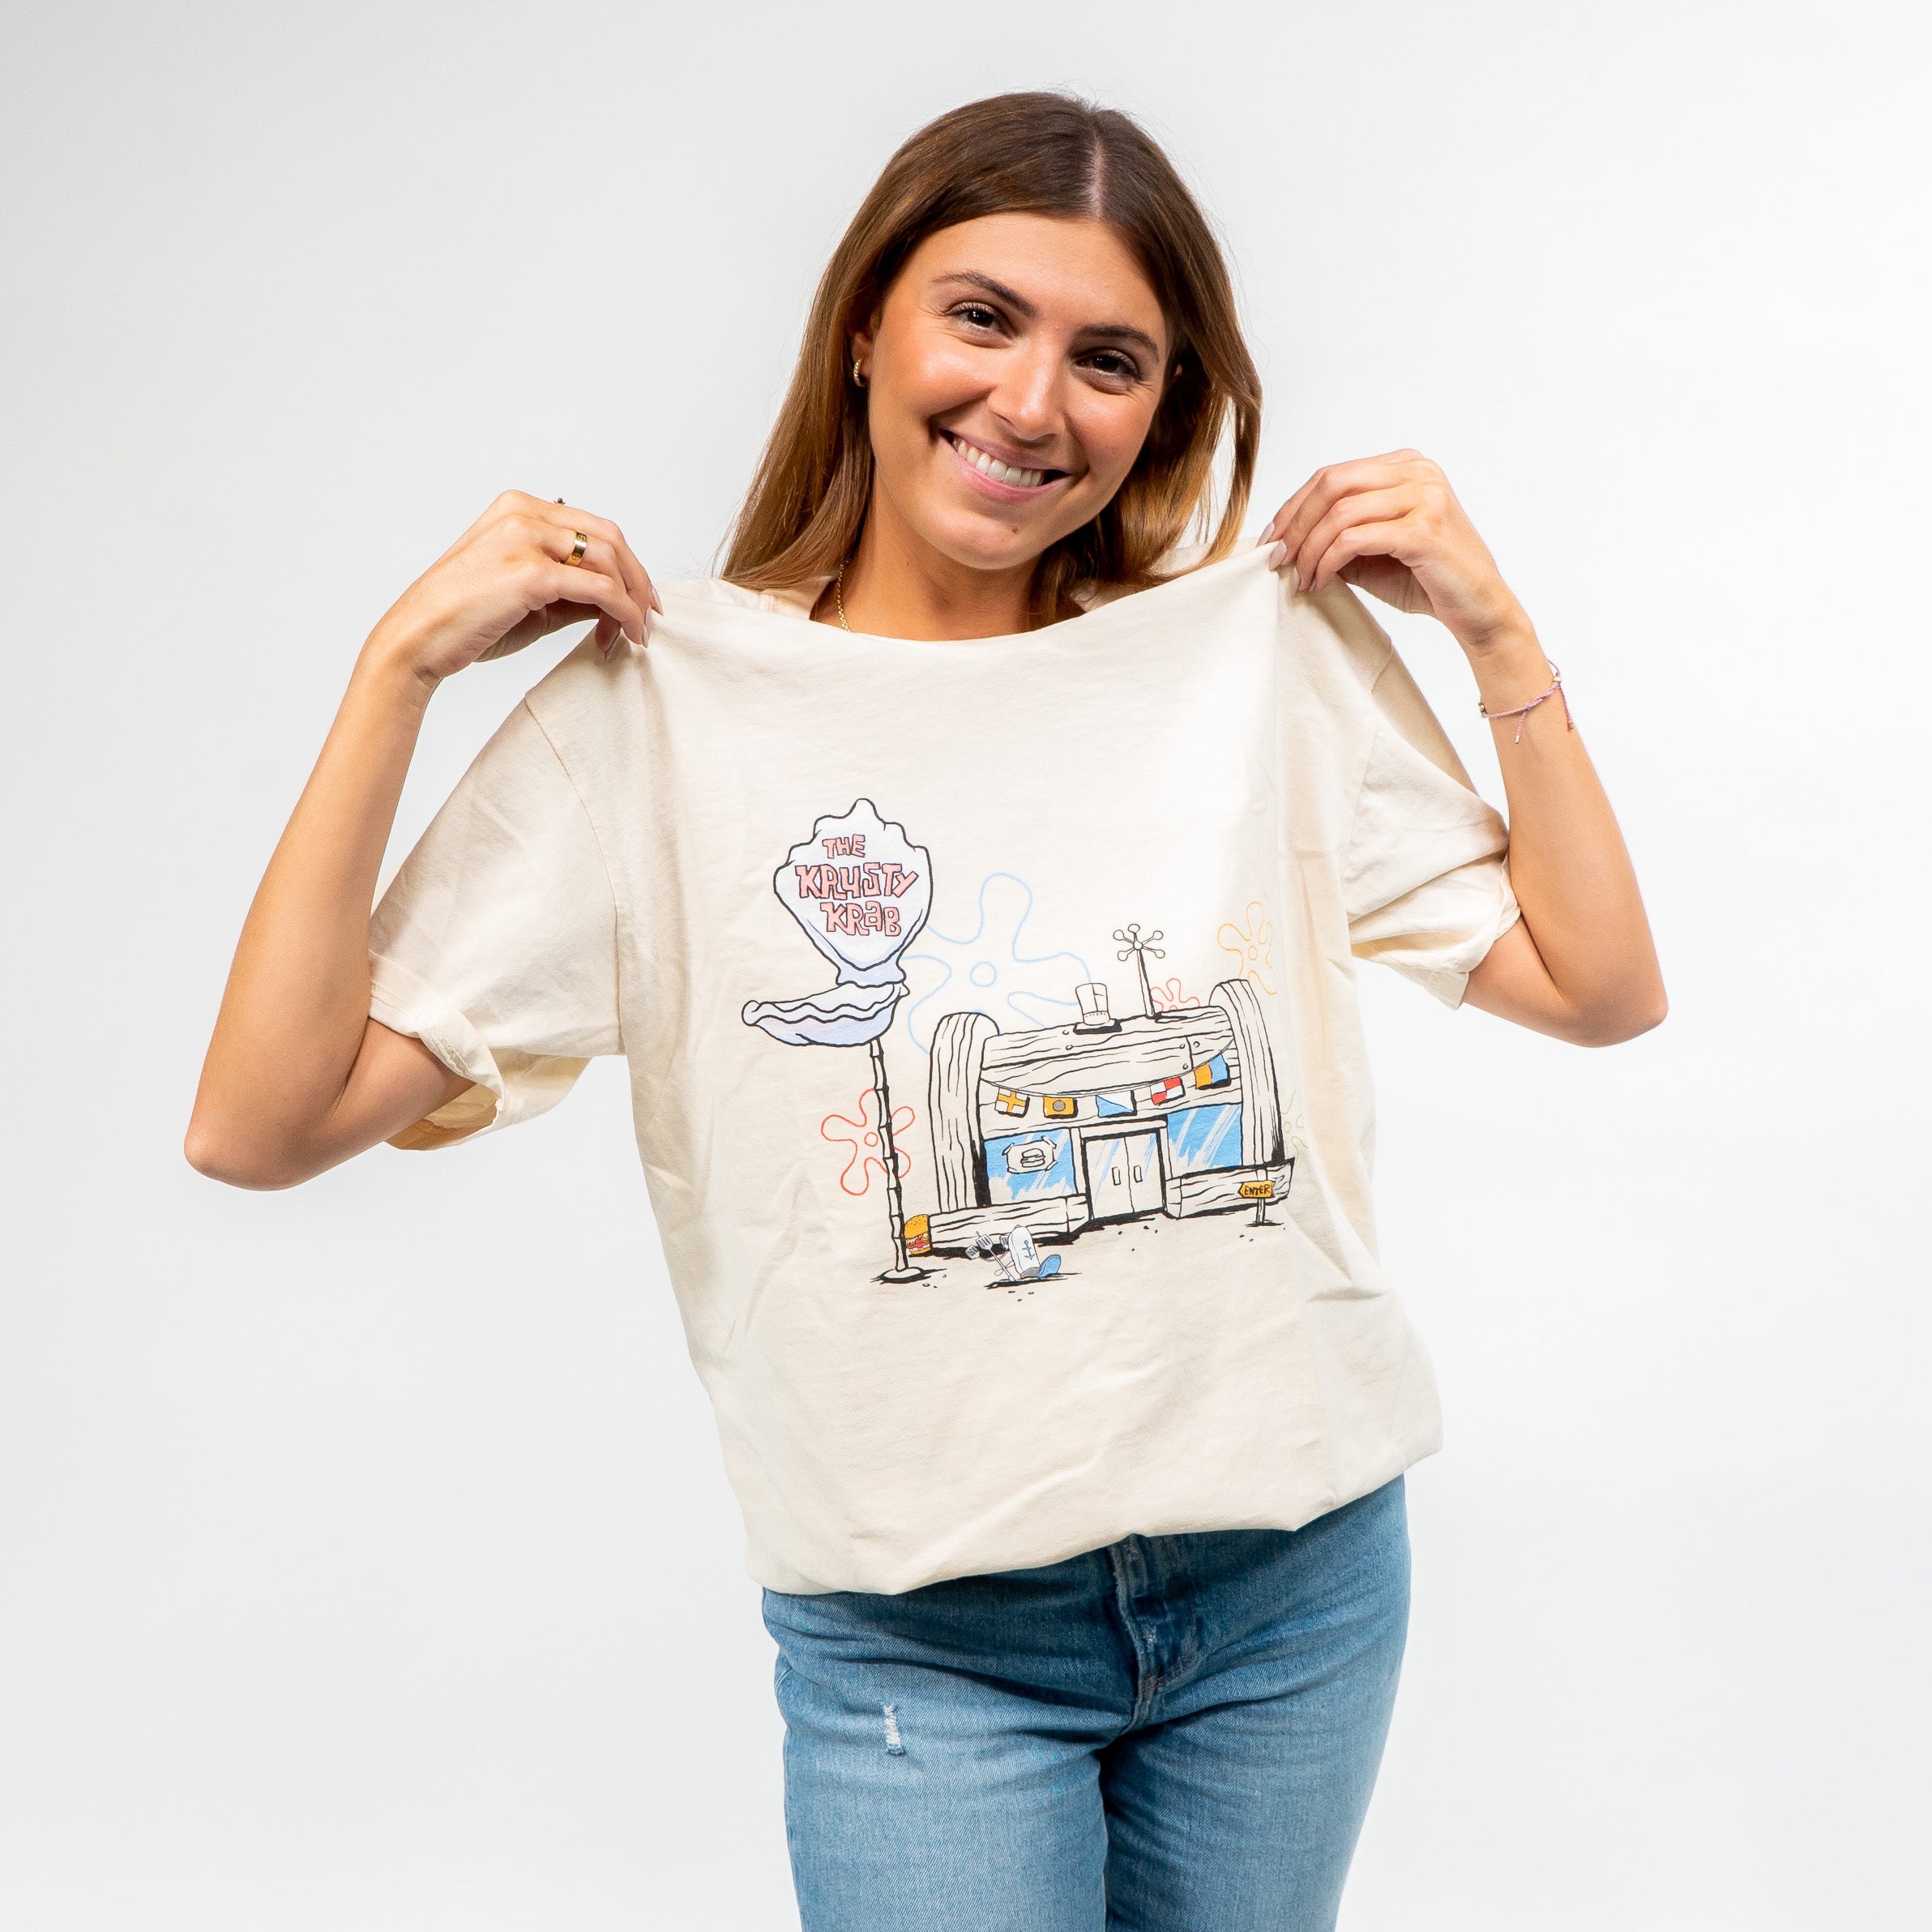 TKK Tee-T-Shirts-Chicks in the Office-Ivory-S-Barstool Sports